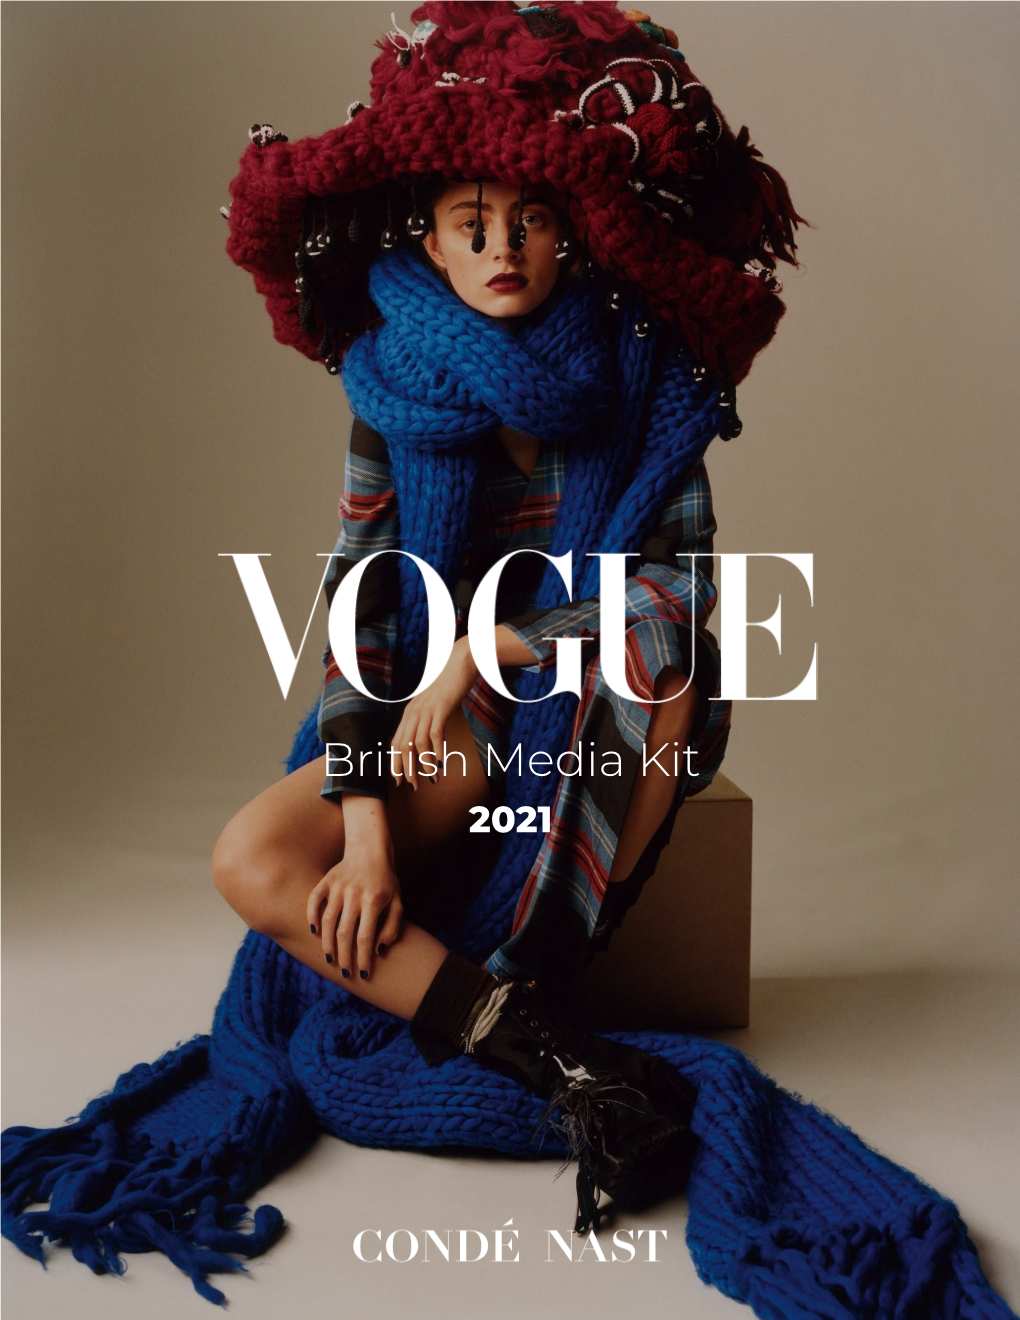 British Media Kit 2021 British Vogue Is the Authority on Fashion, Beauty and Lifestyle, and Is a Destination for Women to Learn, Be Challenged, Inspired and Empowered